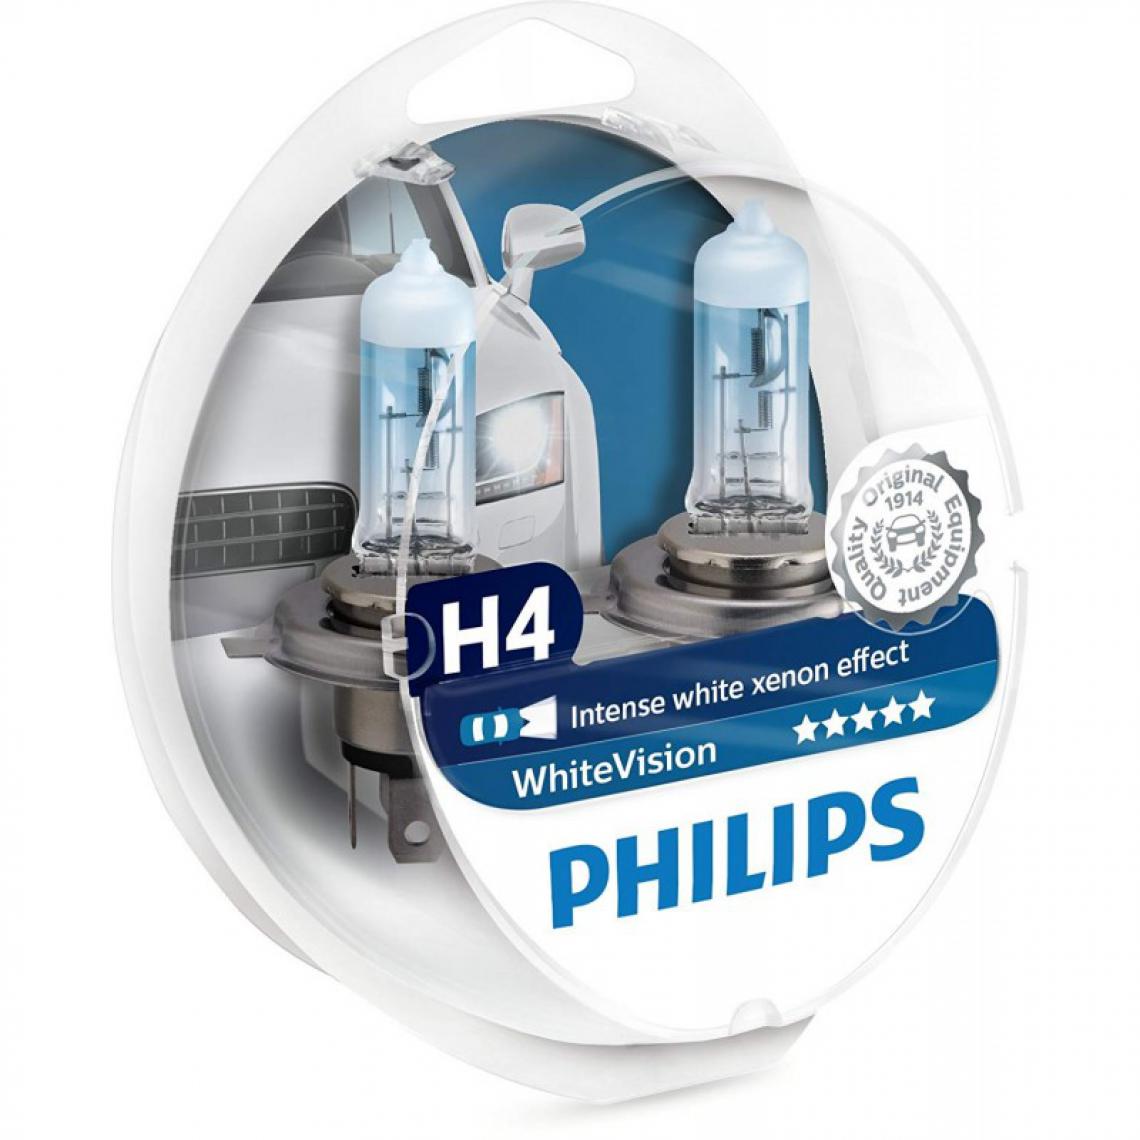 Philips - AMPOULE H4 PHILIPS 12342WHVSM H4/W5W 12342 WHV 12V - Ampoules LED